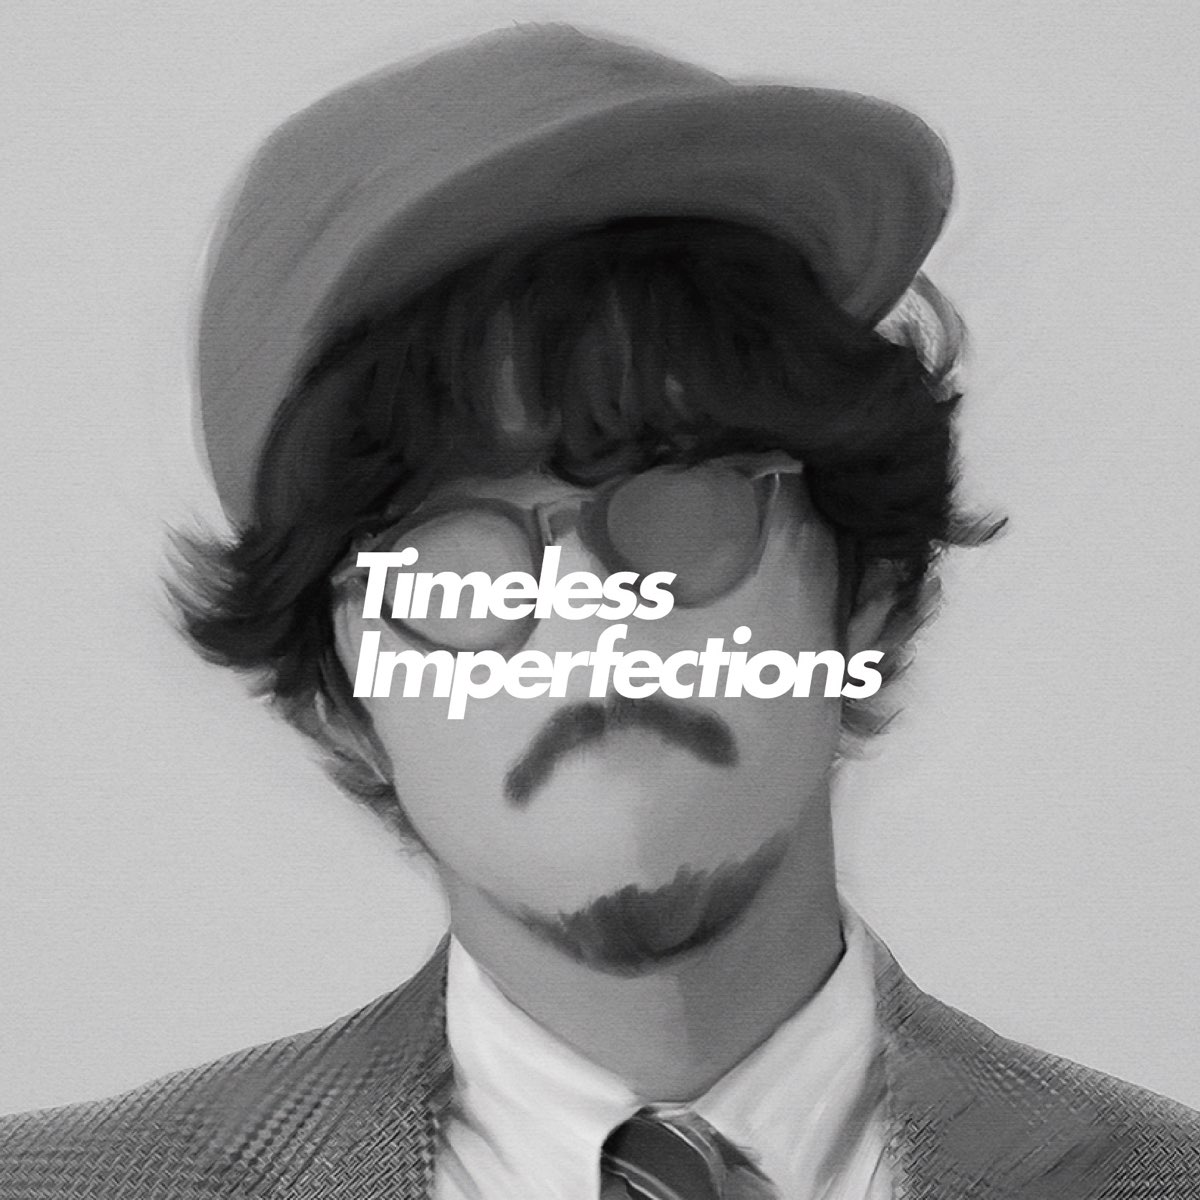 Timeless Imperfections [Side-B] by THE CHARM PARK on Apple Music